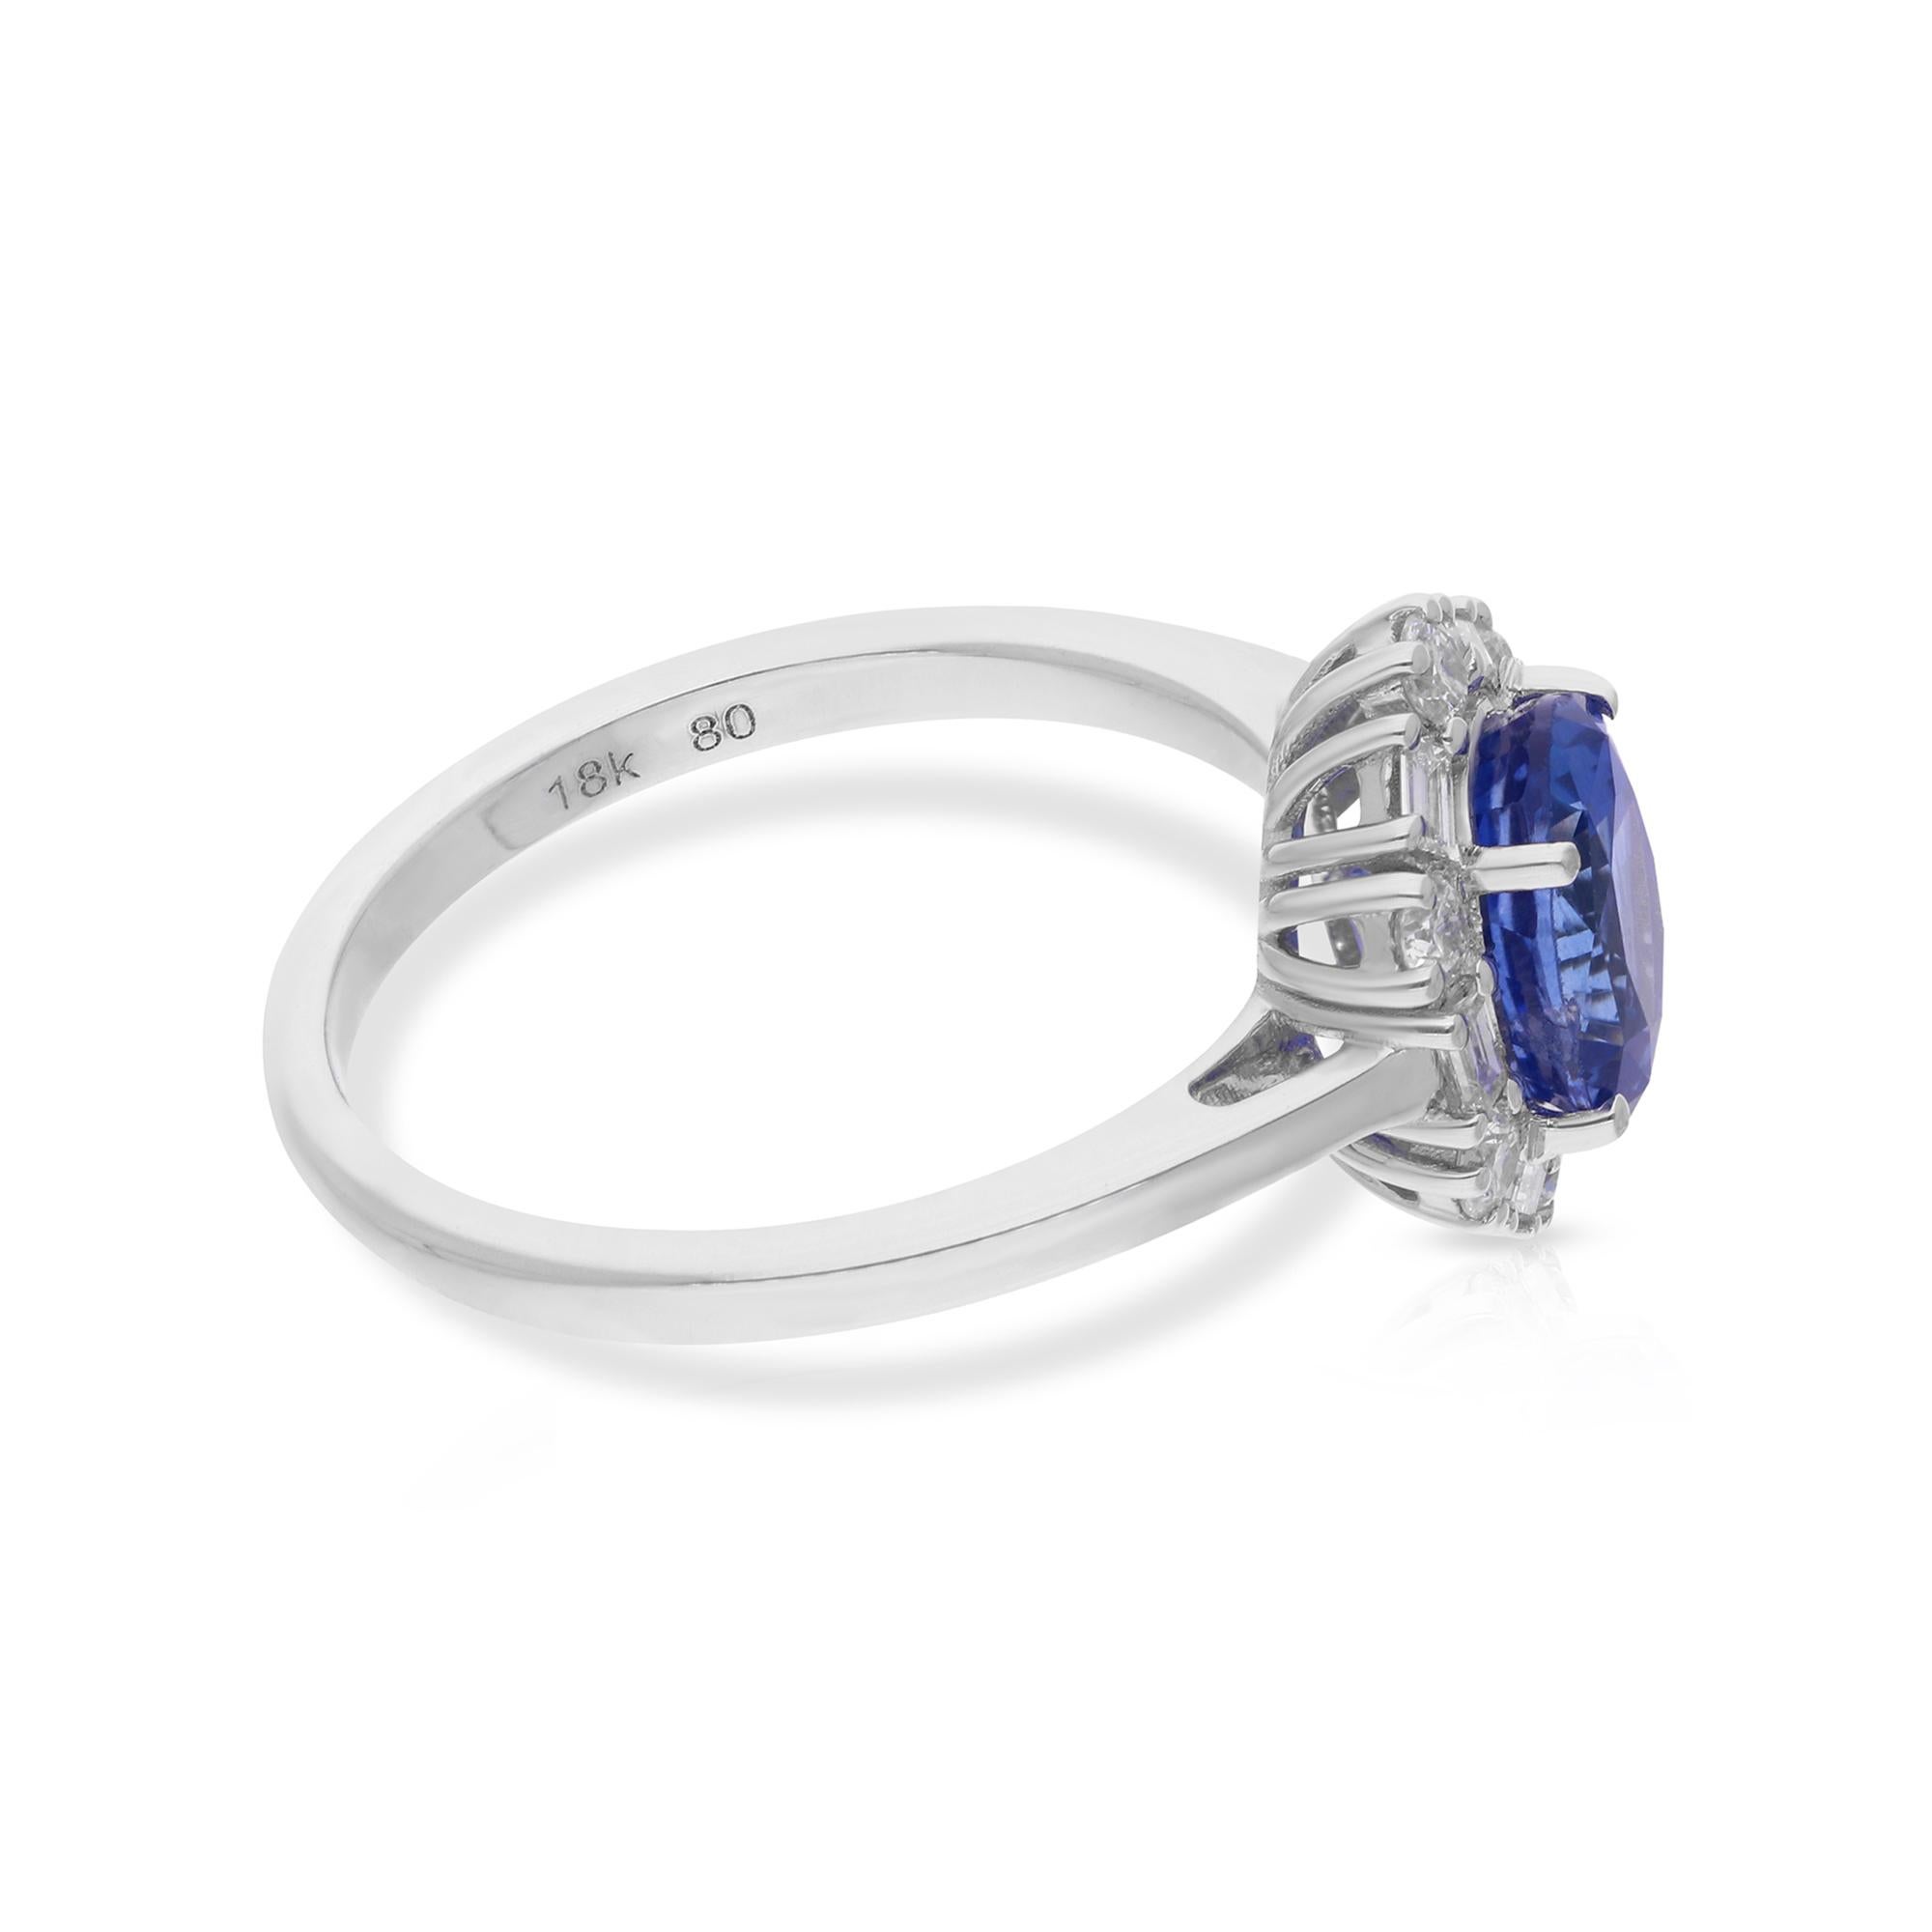 Crafted with meticulous attention to detail, this cocktail ring is a true work of art, designed to be cherished for a lifetime. The 18 karat white gold setting provides a luxurious backdrop for the gemstone and diamonds, enhancing their radiance